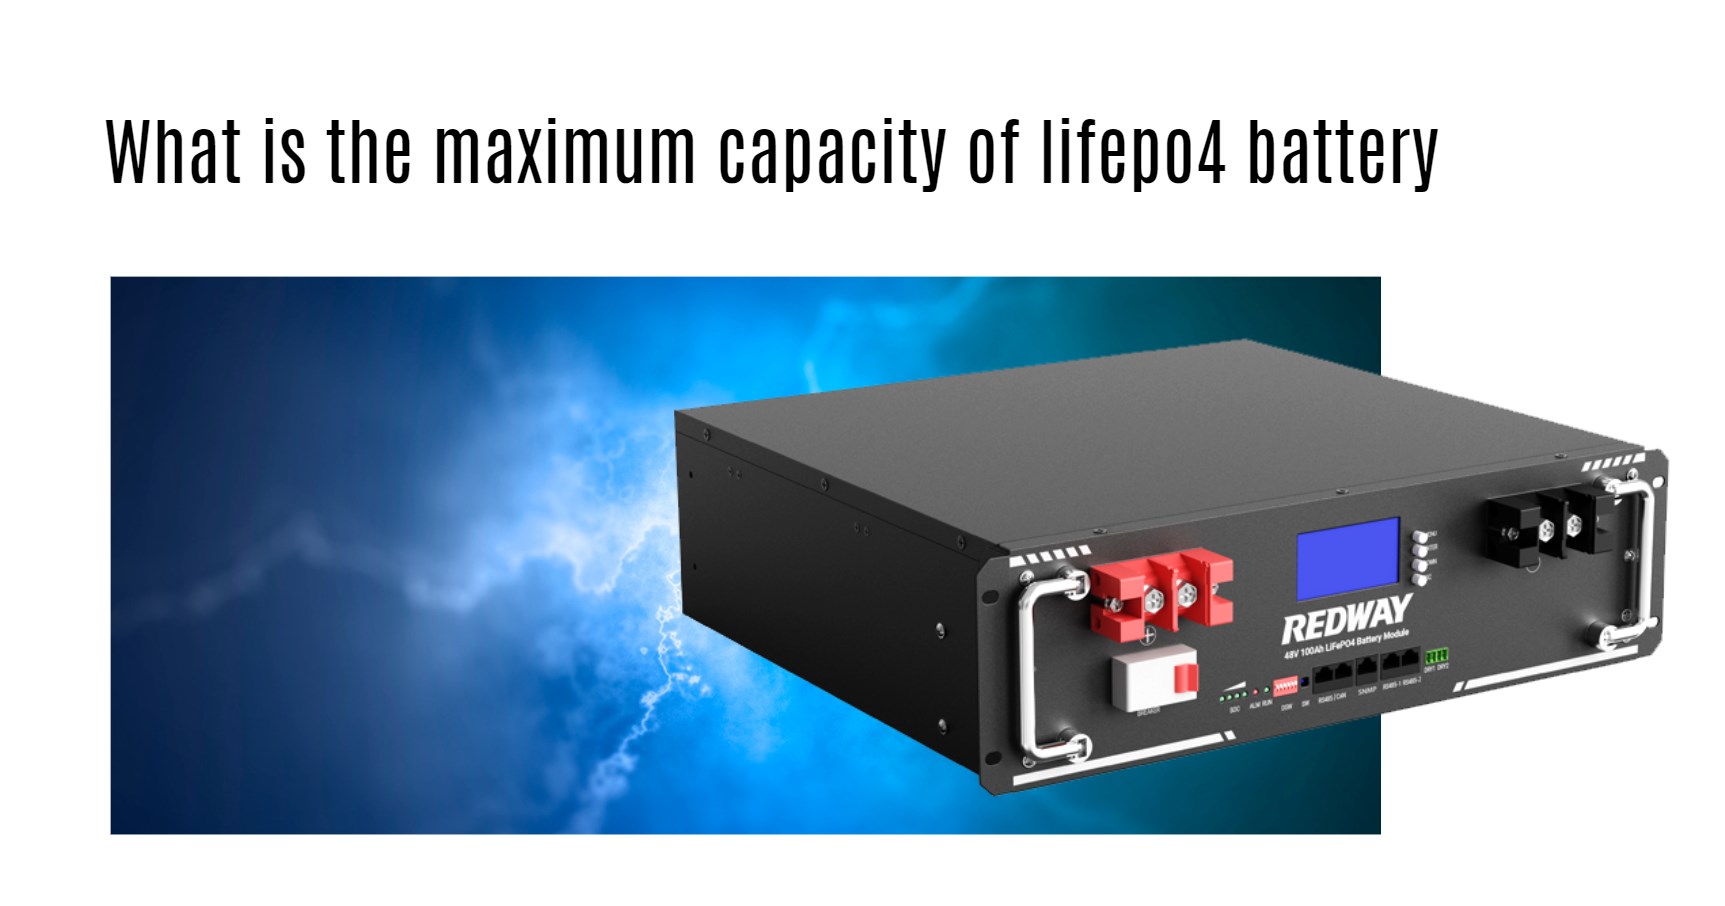 What is the maximum capacity of lifepo4 battery